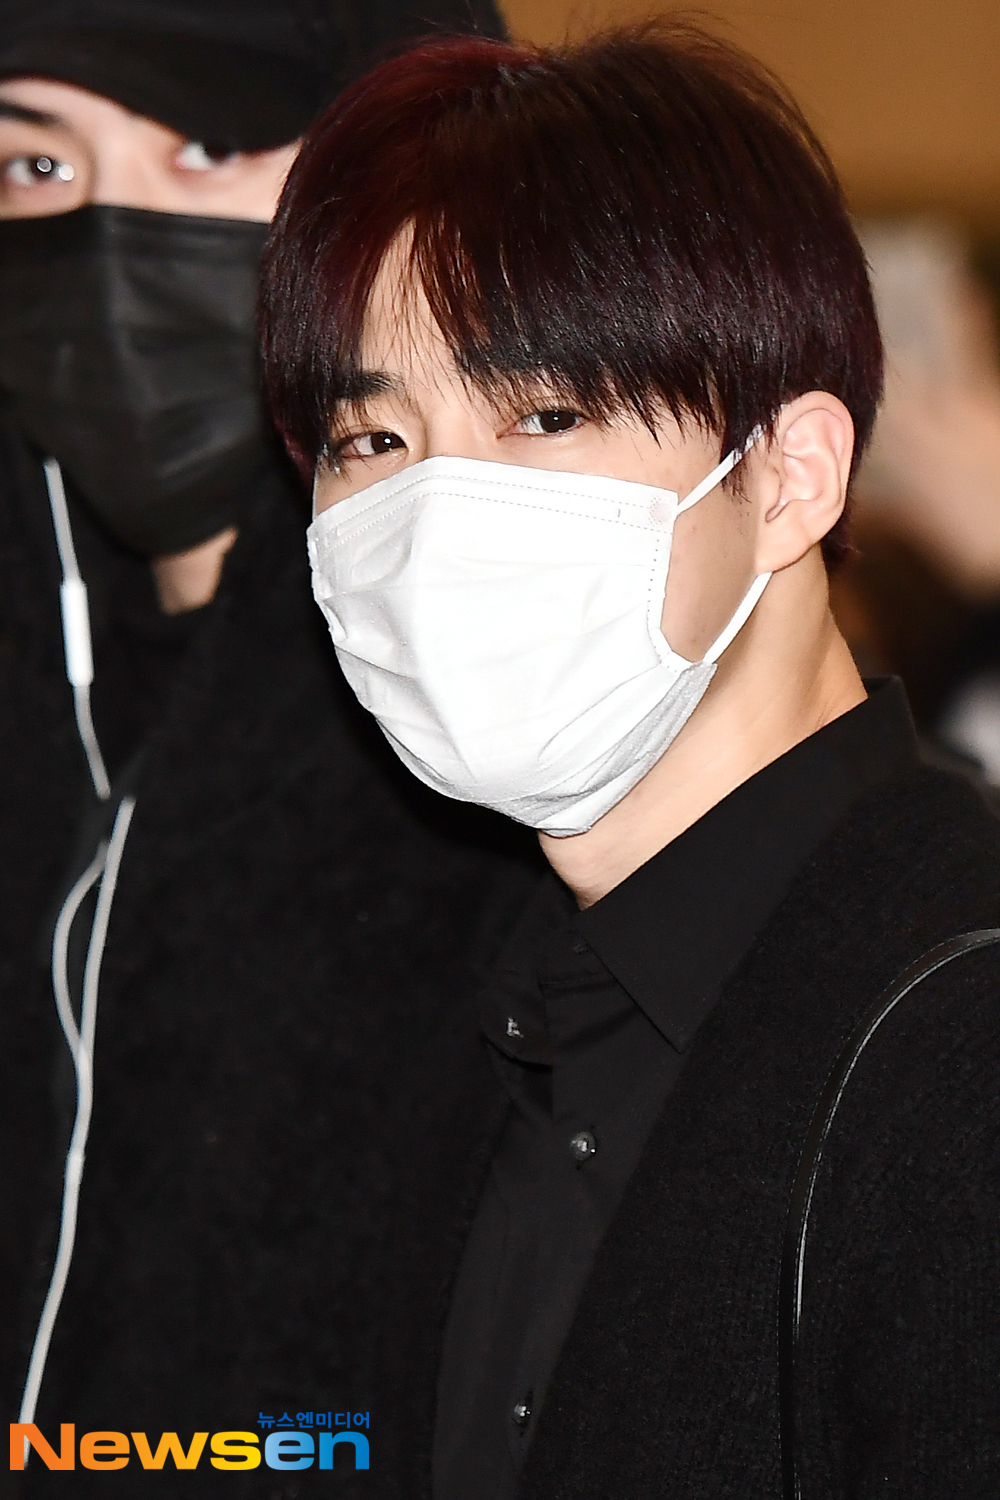 EXO (EXO) members Suho, Chanyeol, Kai, Baekhyun, Sehun and Chen departed for Japan Osaka University on October 17 at Gimpo International Airport in Banghwa-dong, Gangseo-gu, Seoul to attend EXO PLANET #5 - EXpLOration - In Japan schedule.EXO (EXO) member Suho is leaving for Japan Osaka University.exponential earthquake